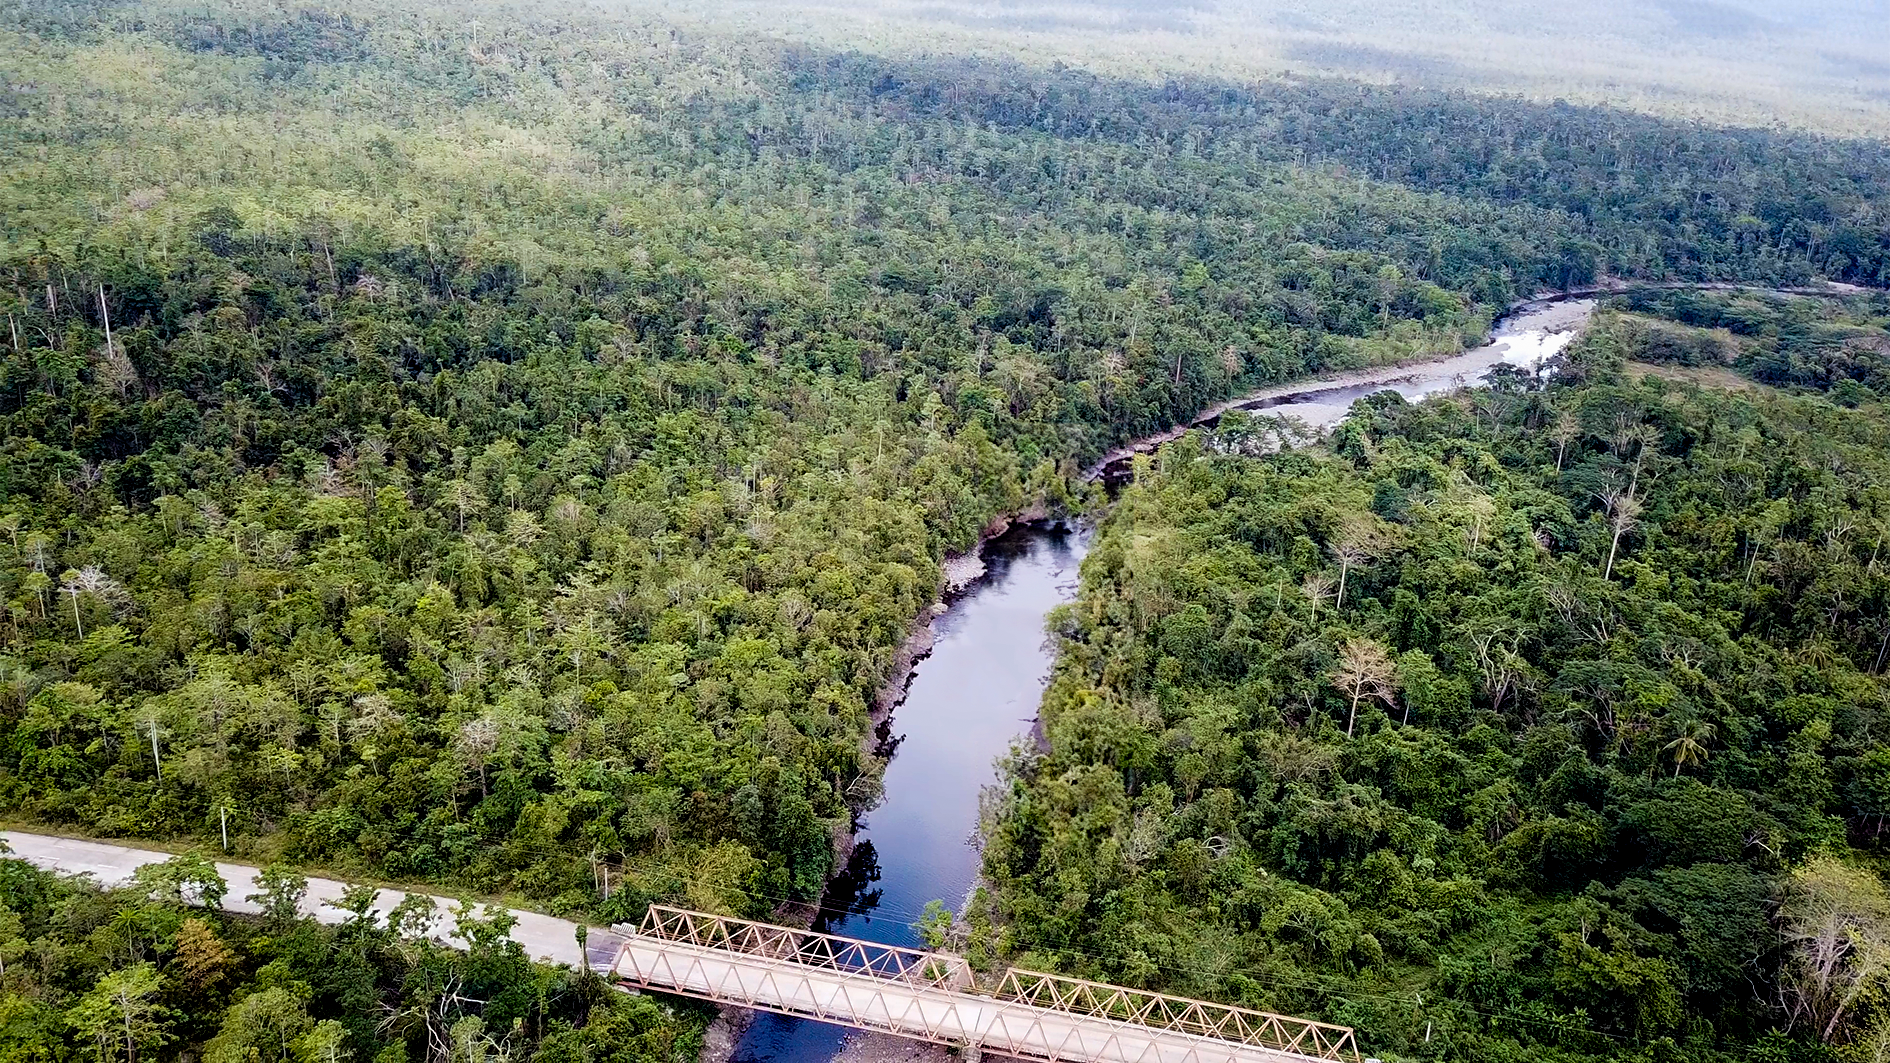 An aerial view of a bridge over a watershed.